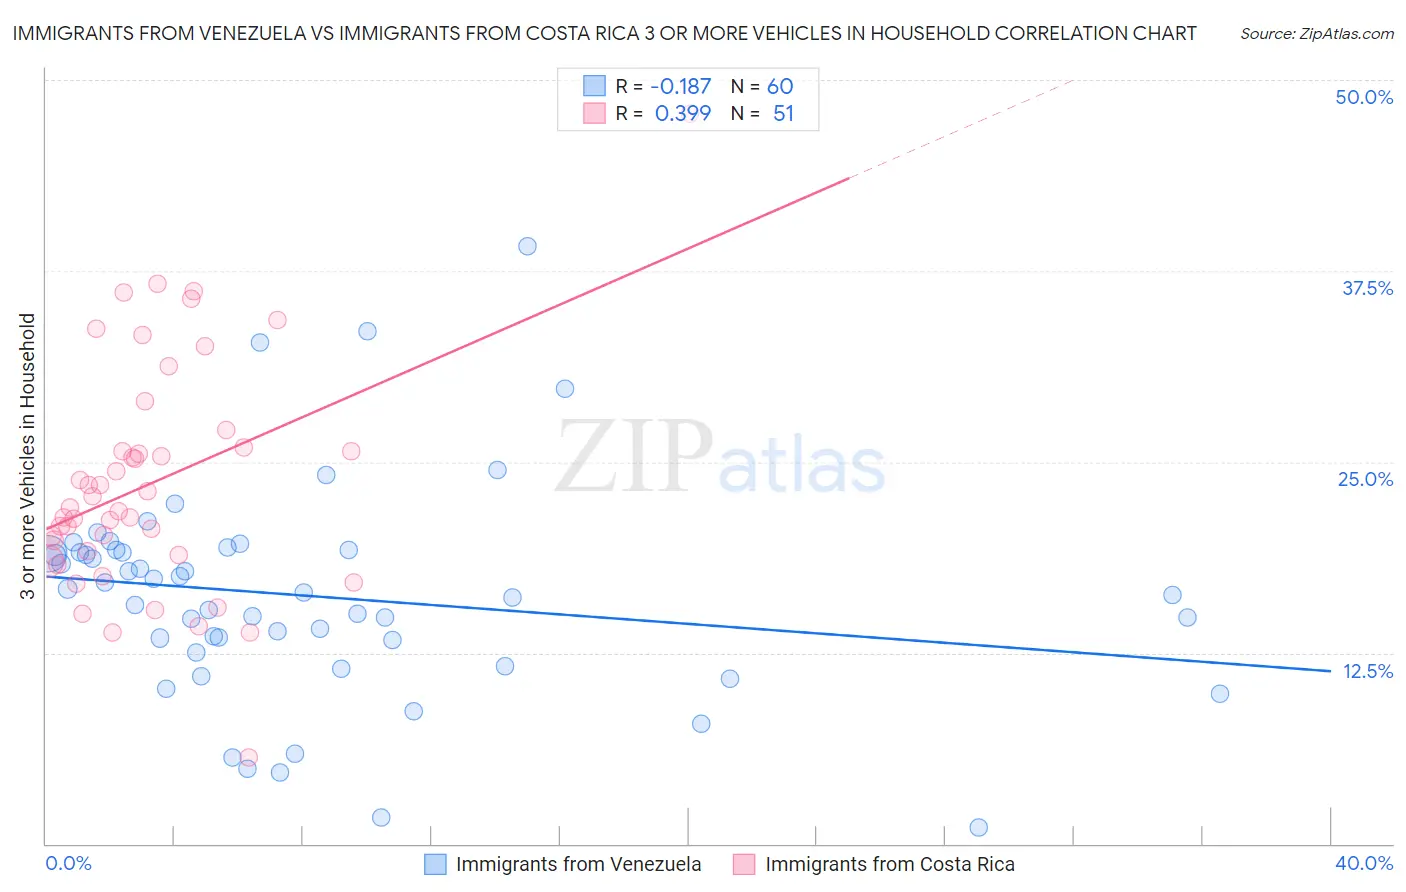 Immigrants from Venezuela vs Immigrants from Costa Rica 3 or more Vehicles in Household